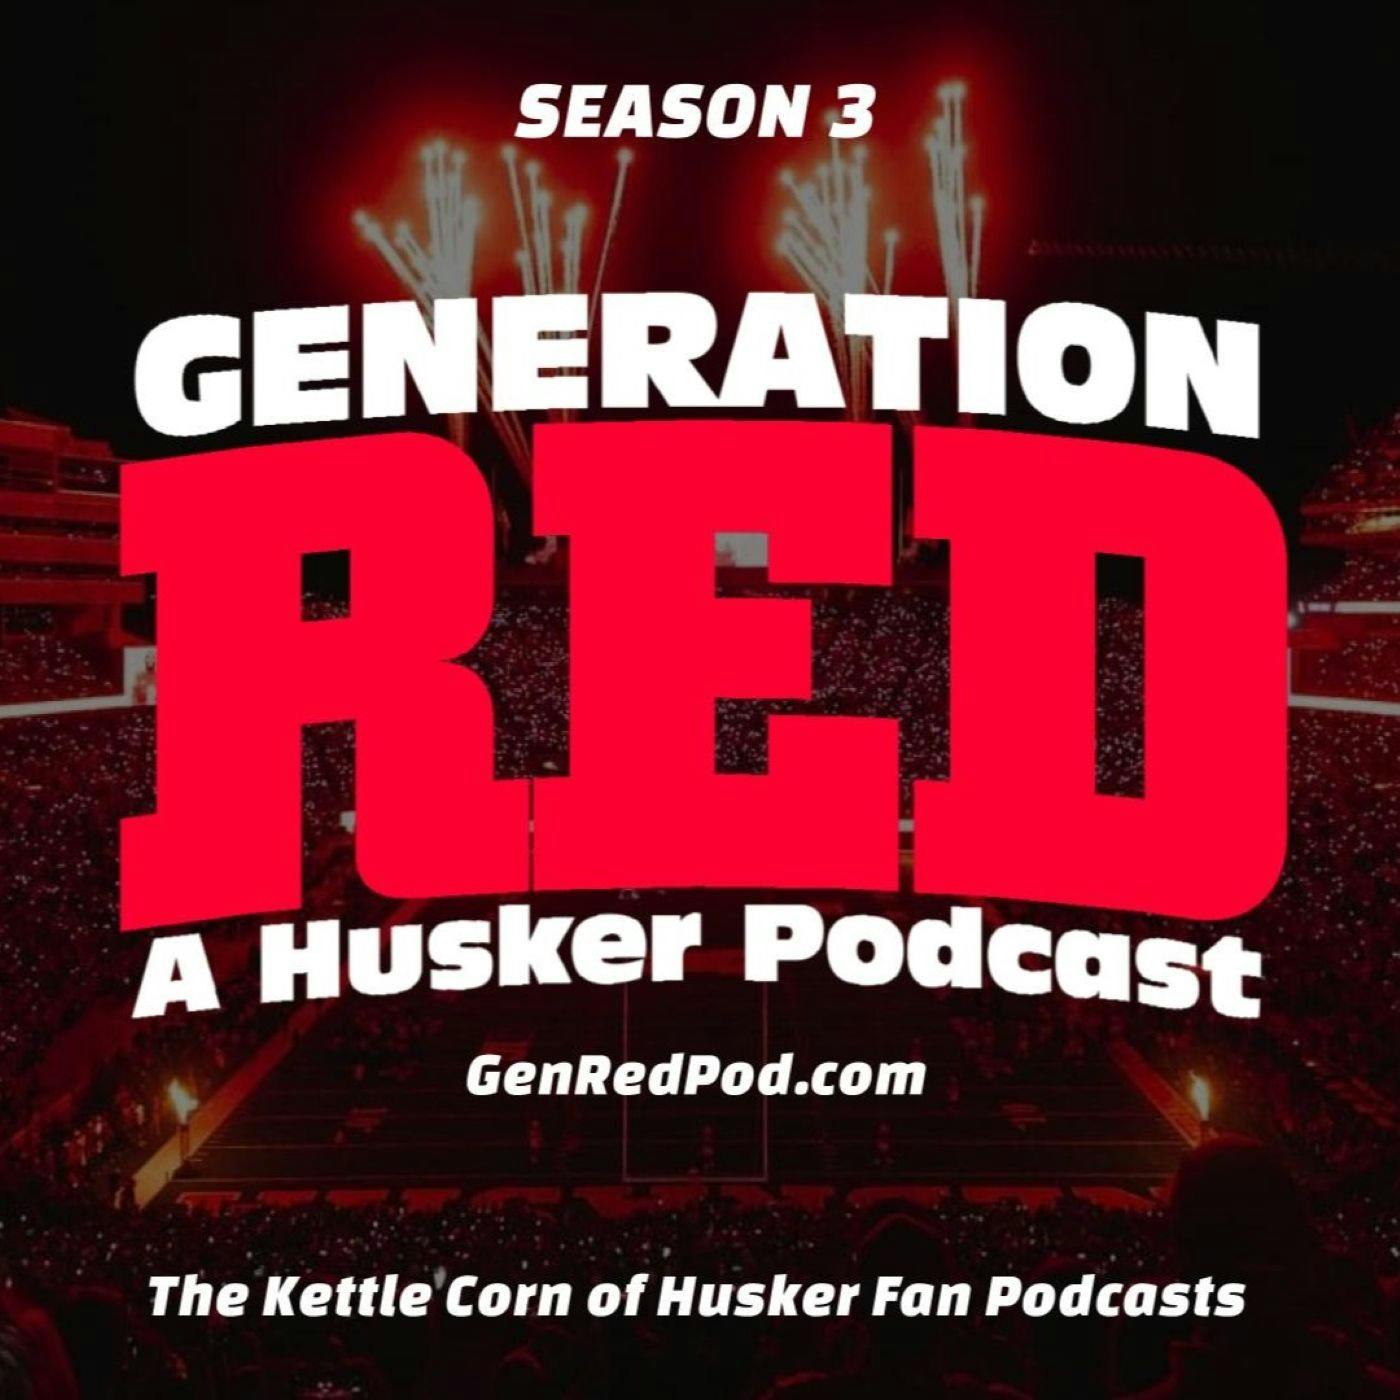 Slammin’ Some Rhule-Aid - with Bryan from the Husker Army Podcast